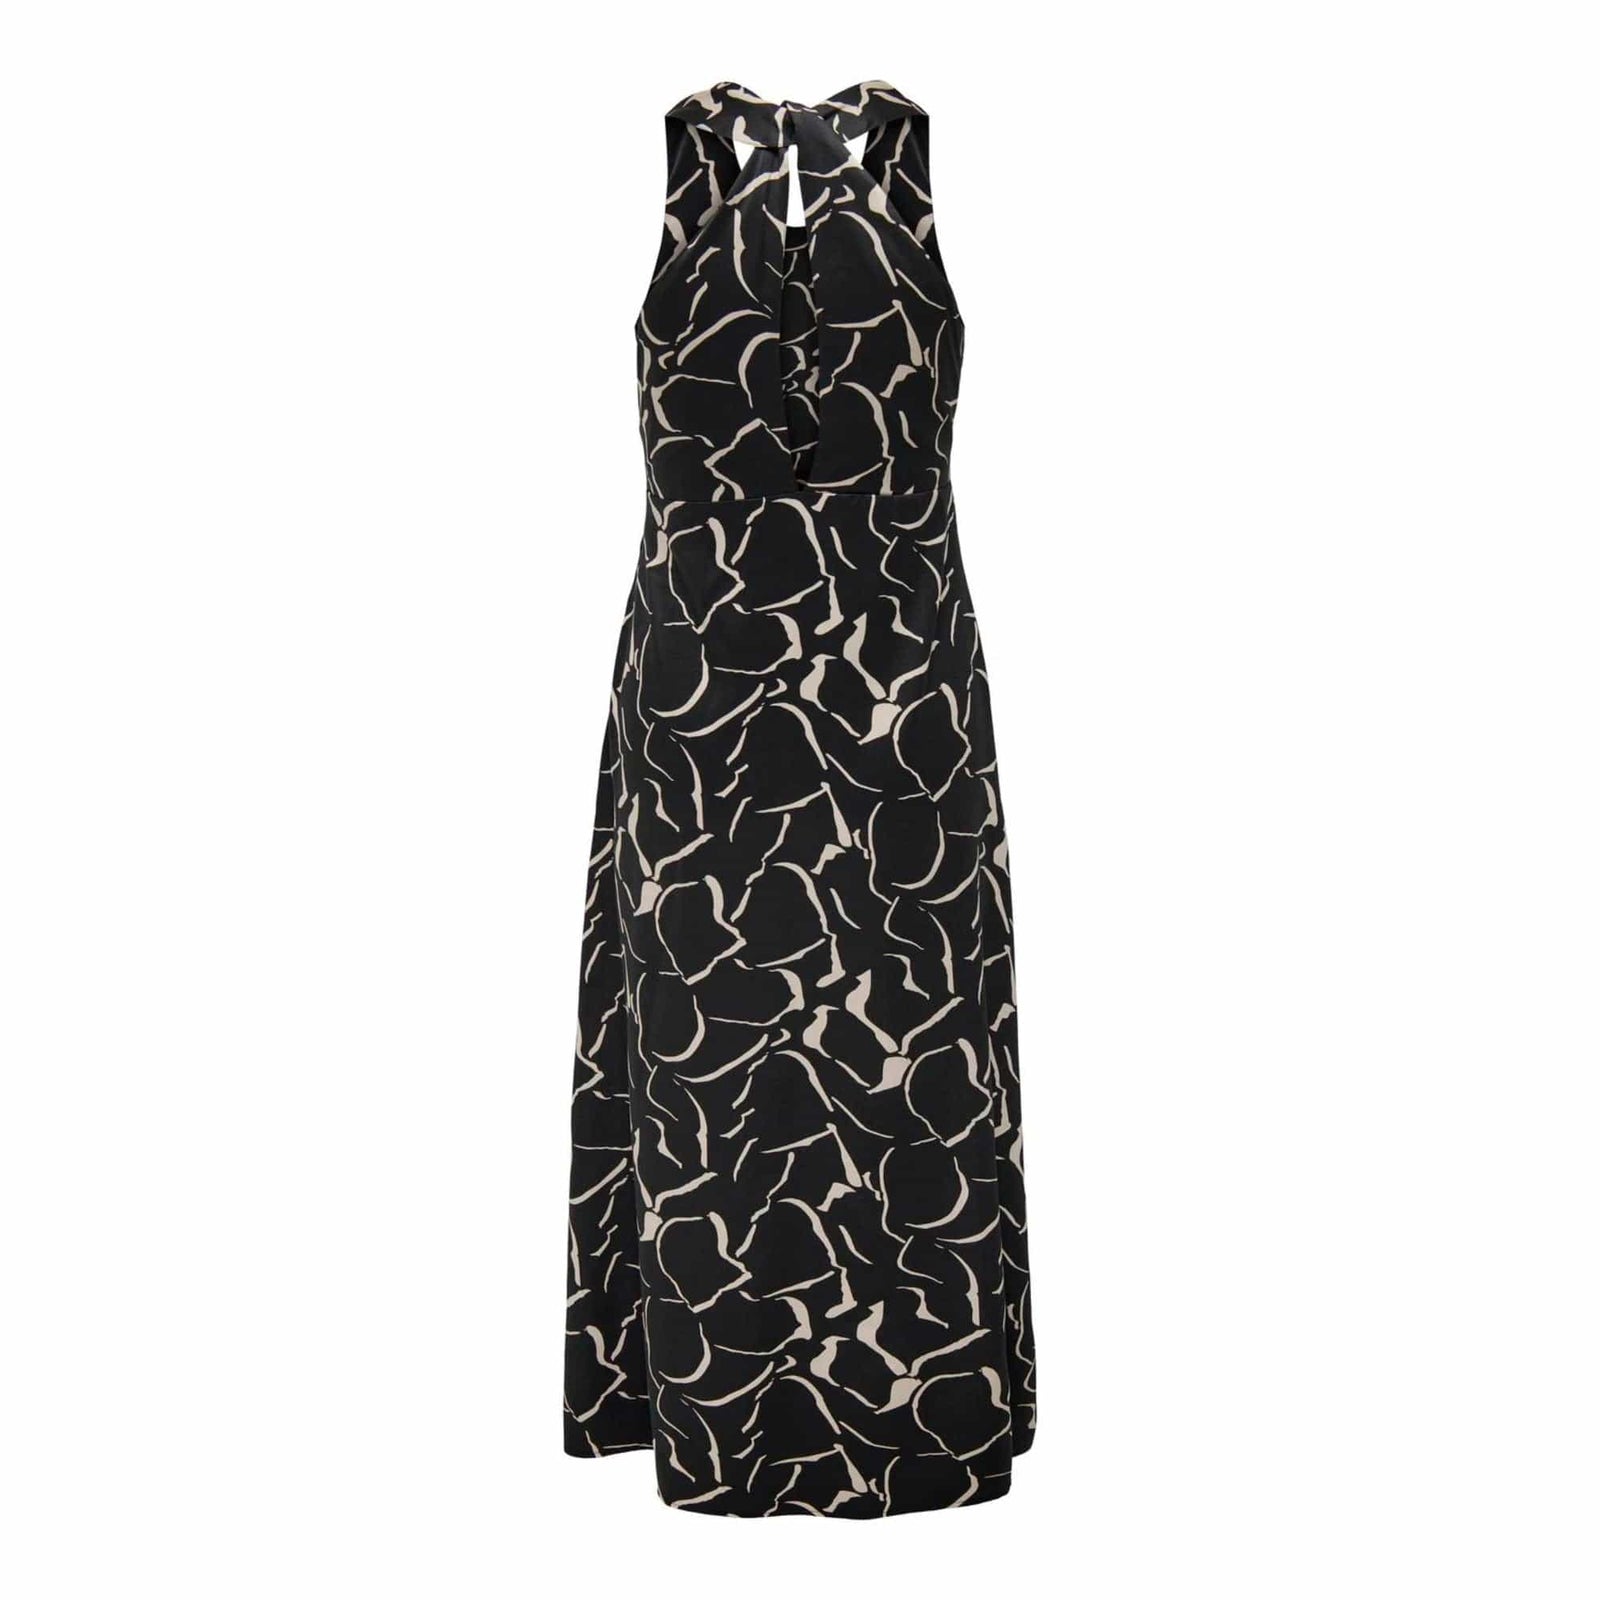 ONLY Maxi Dress with V-Neck in Black